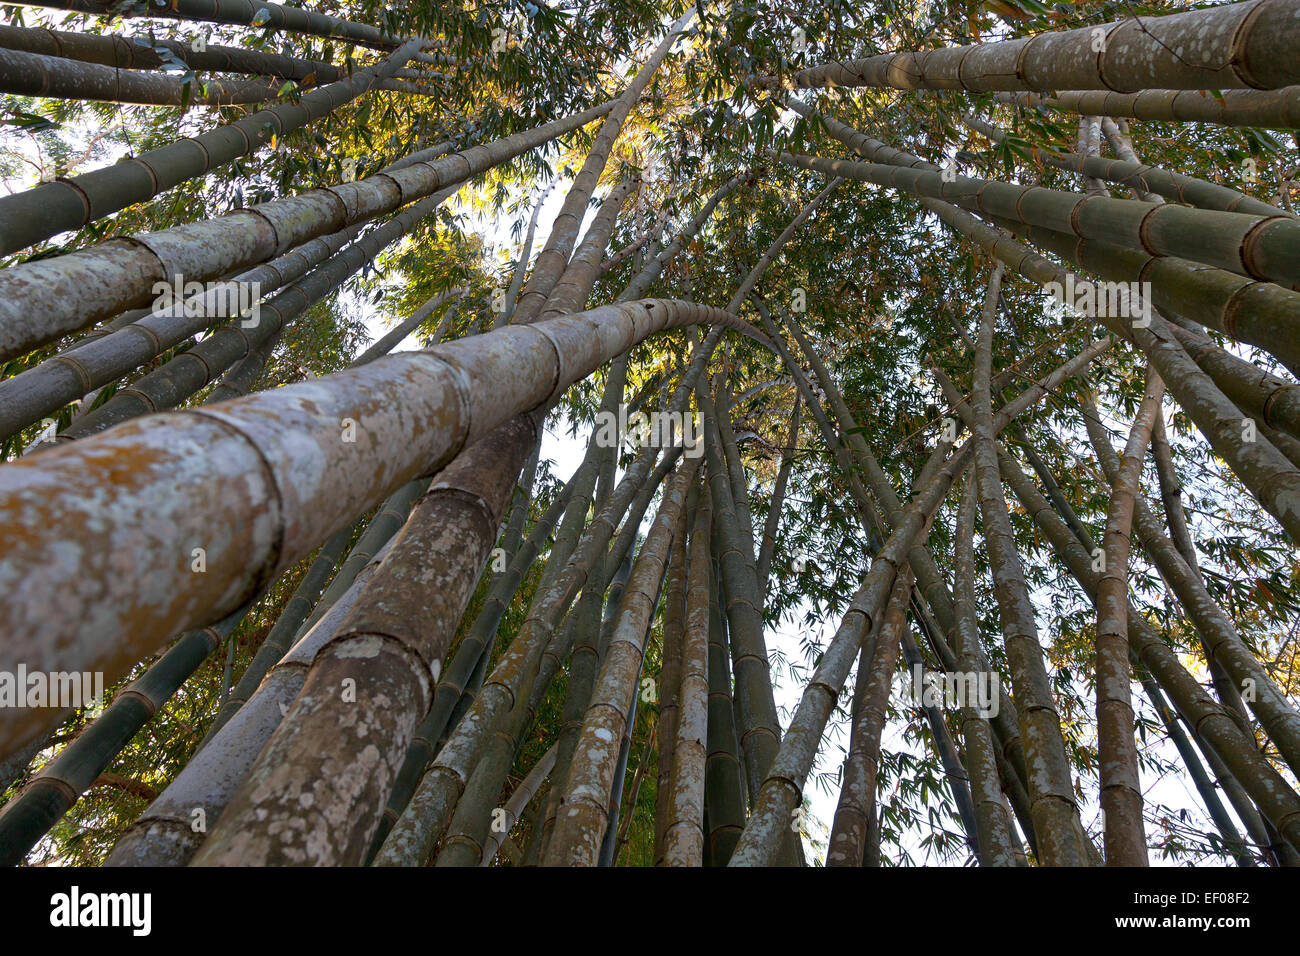 High  Bitoong bamboo seen from below on the ground Stock Photo